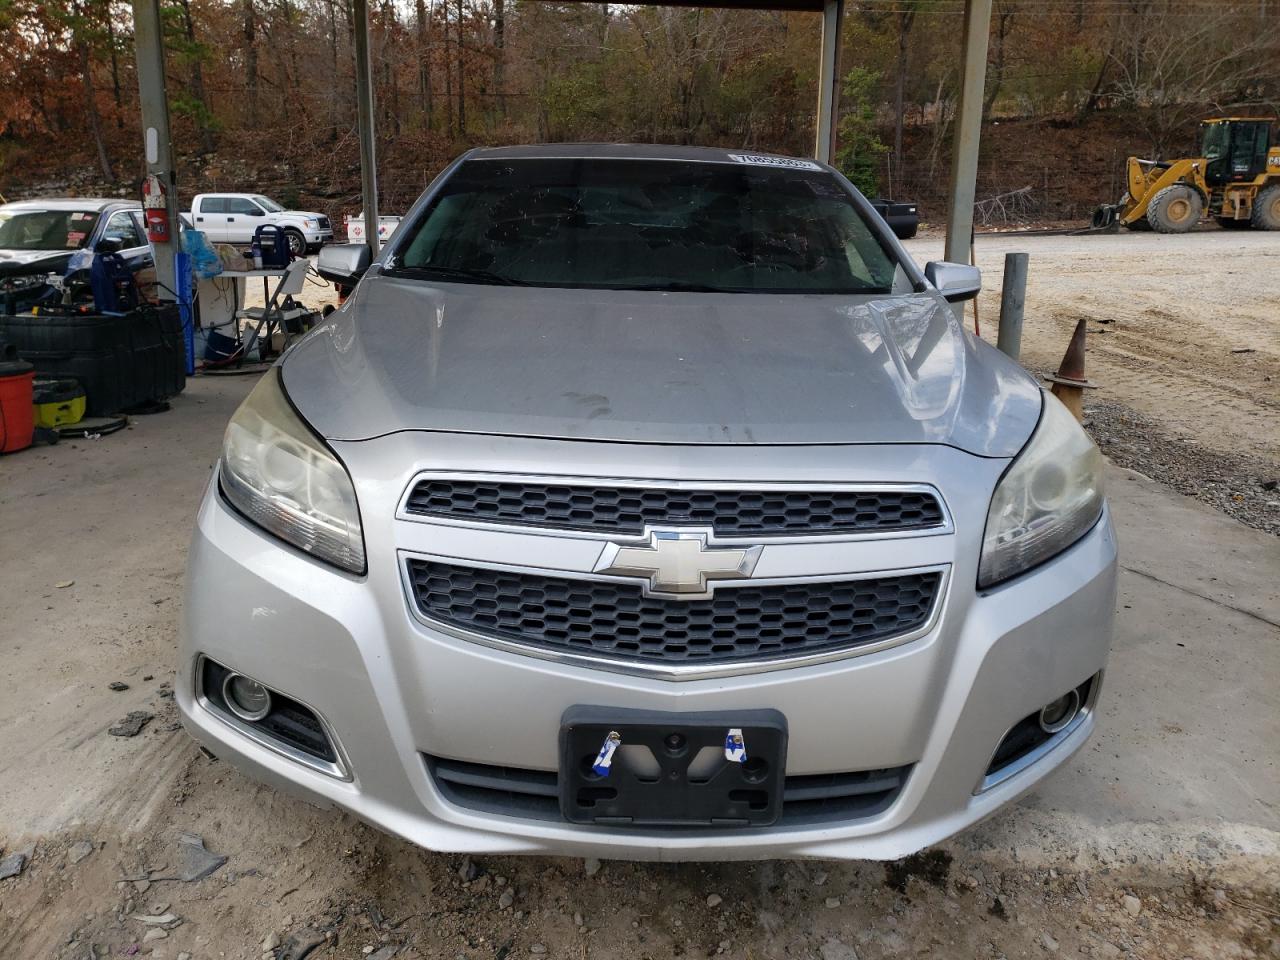 1G11F5RR1DF****** Used and Repairable 2013 Chevrolet Malibu in Alabama State